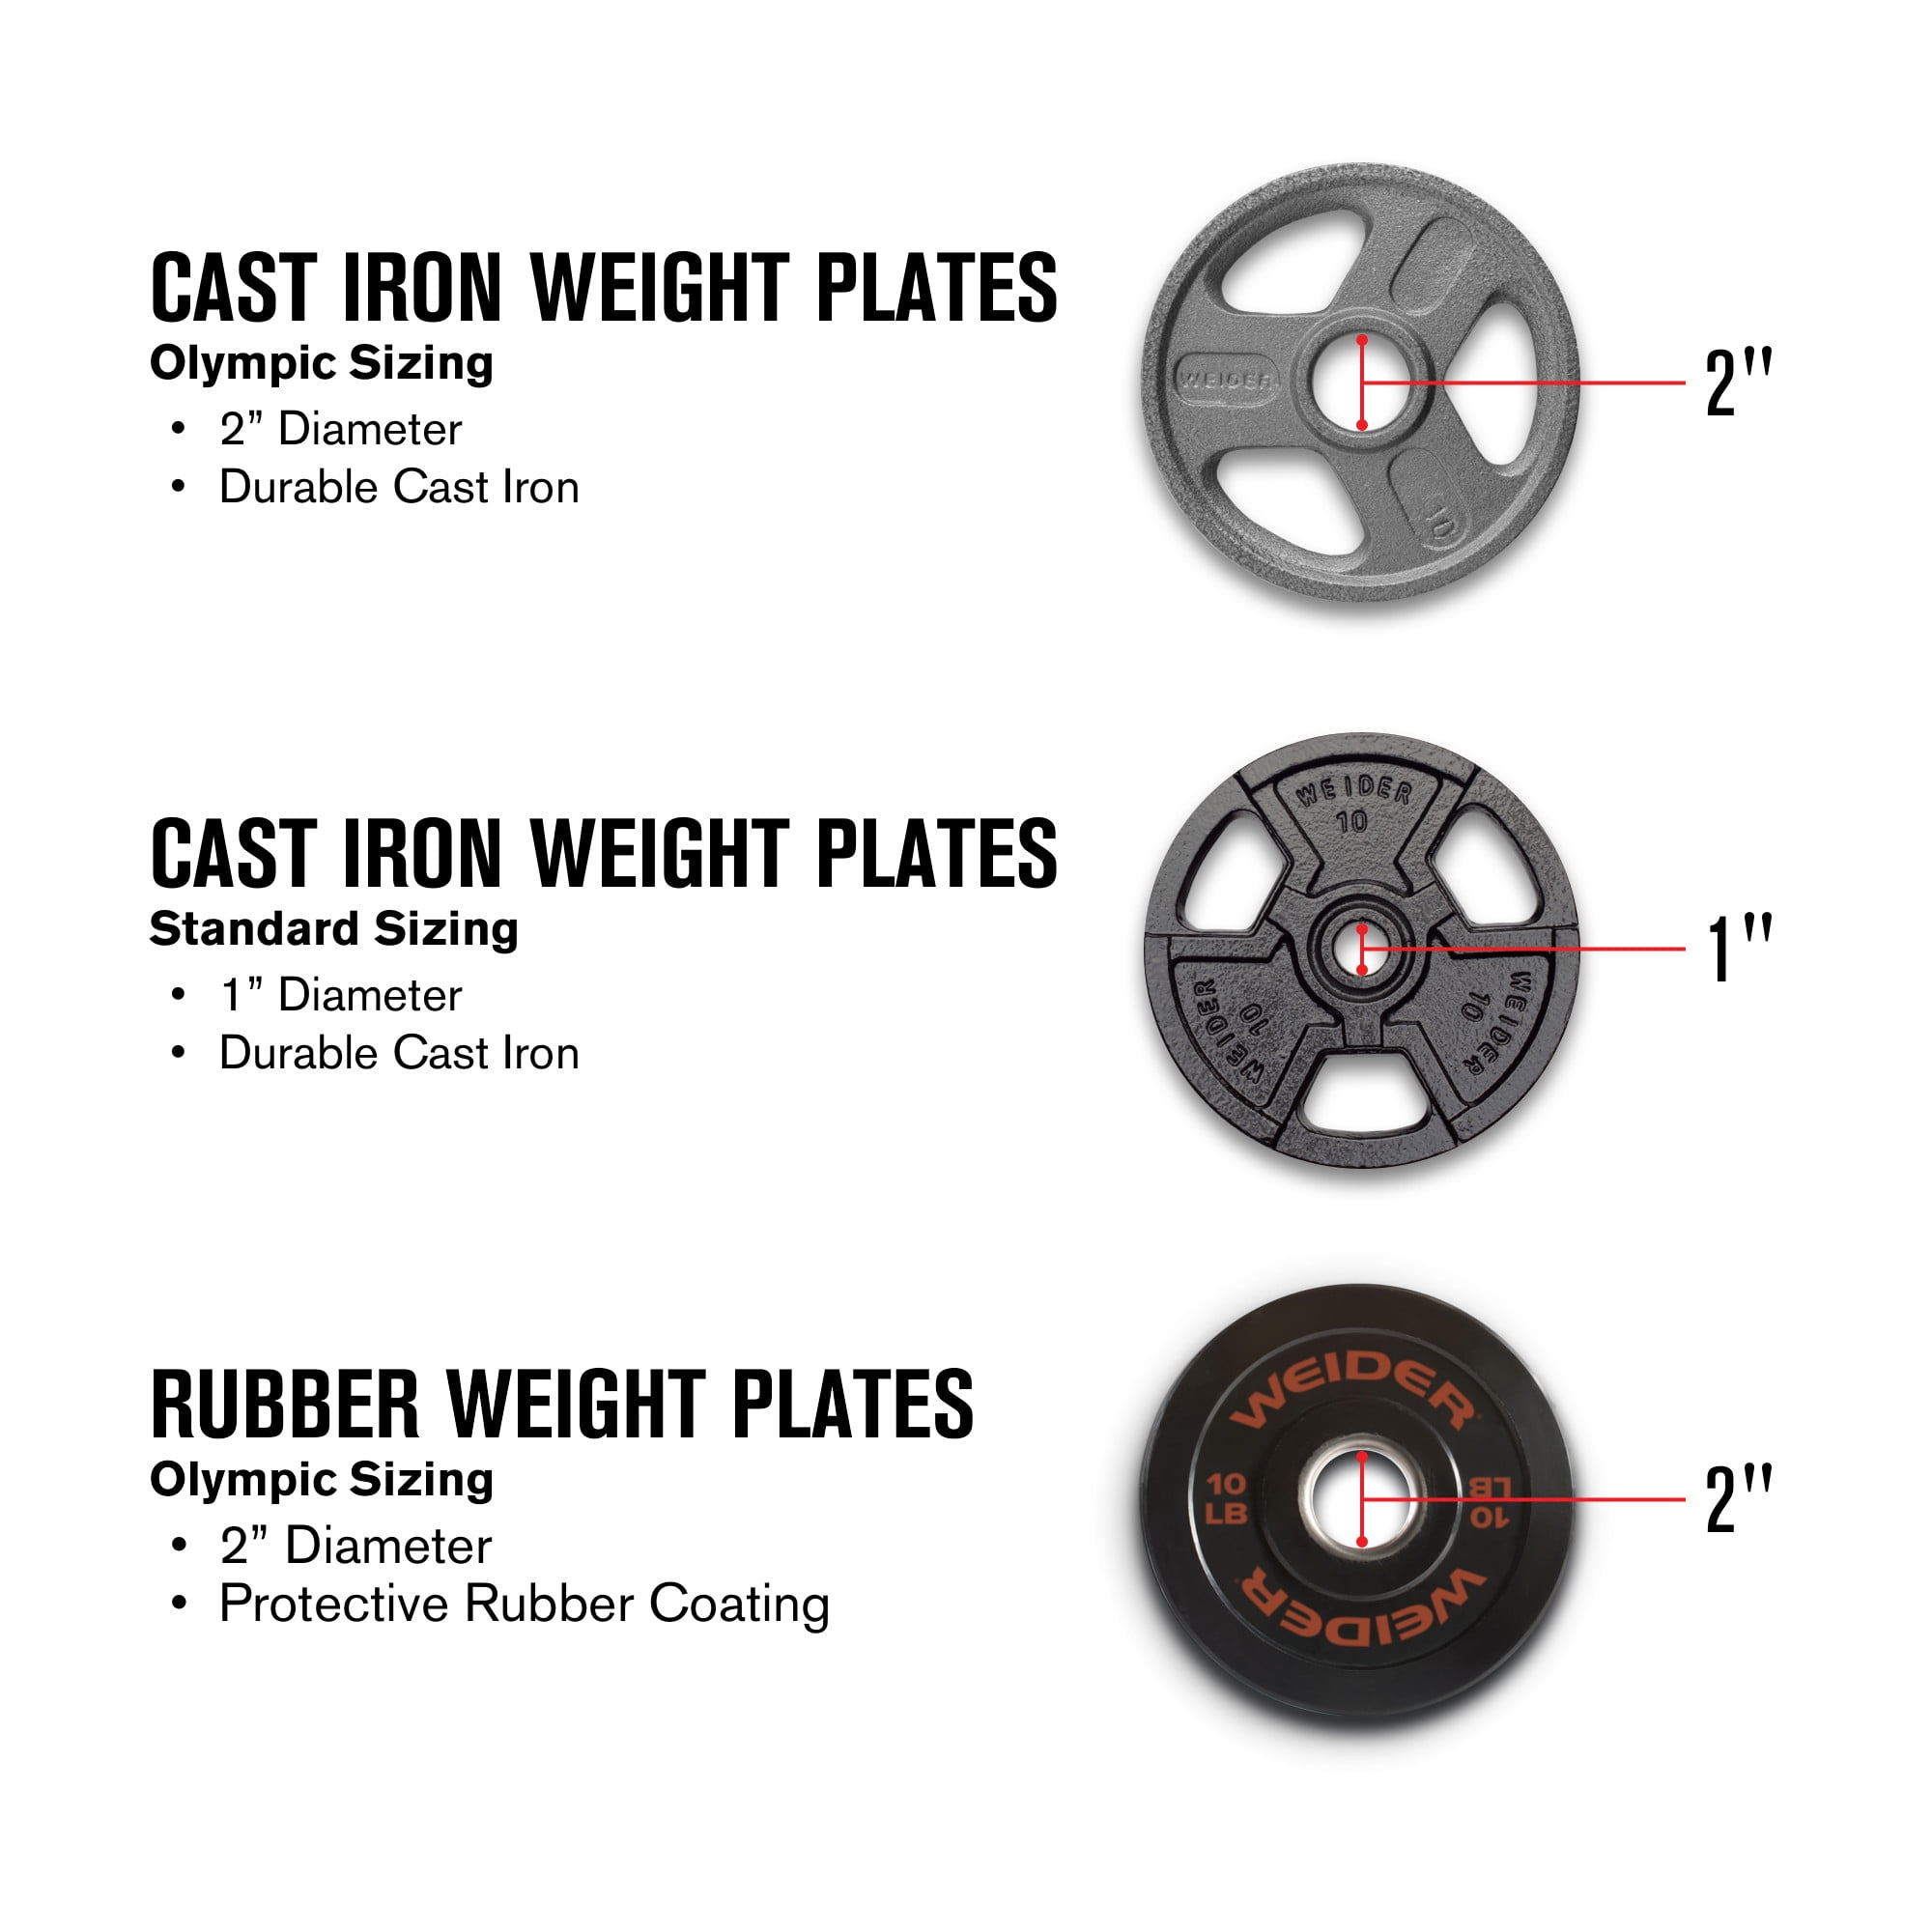 Details about   Weider 2" Olympic Weight Plates 